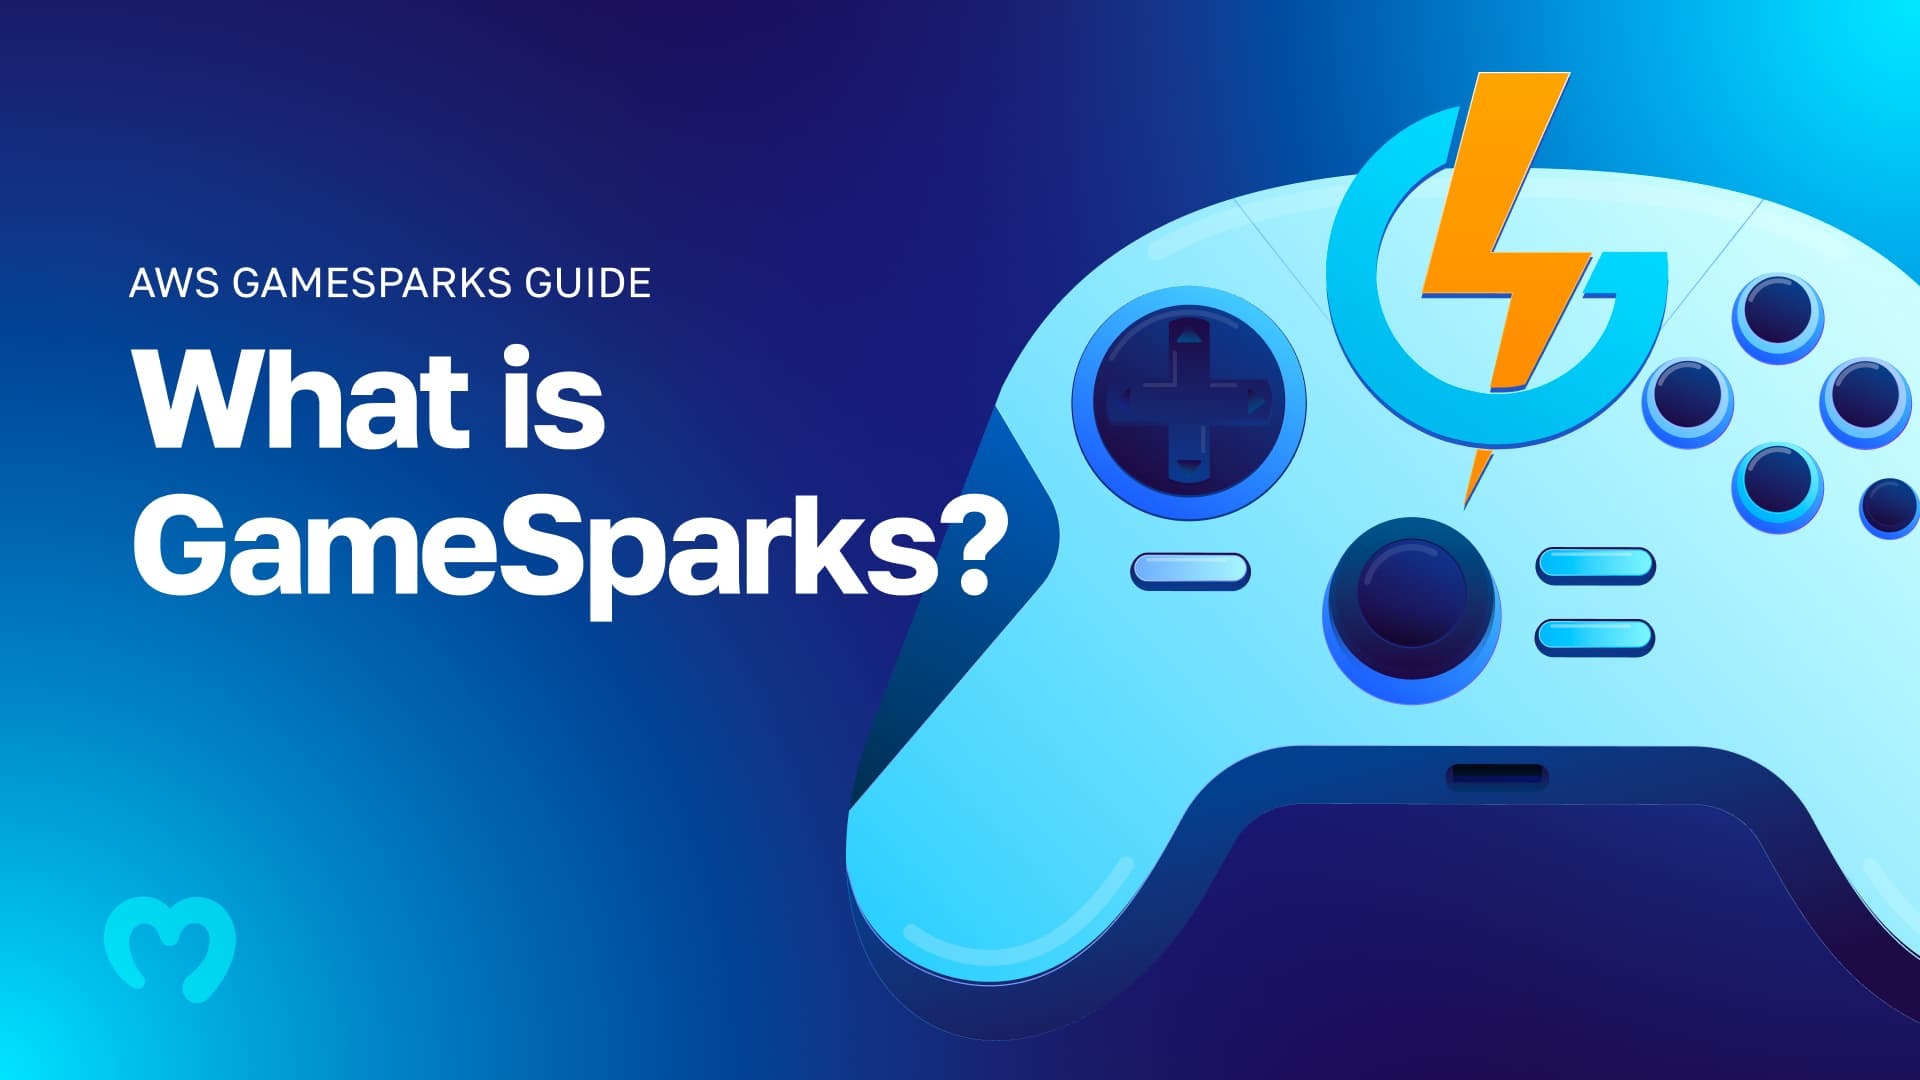 AWS GameSparks Guide - What is GameSparks?